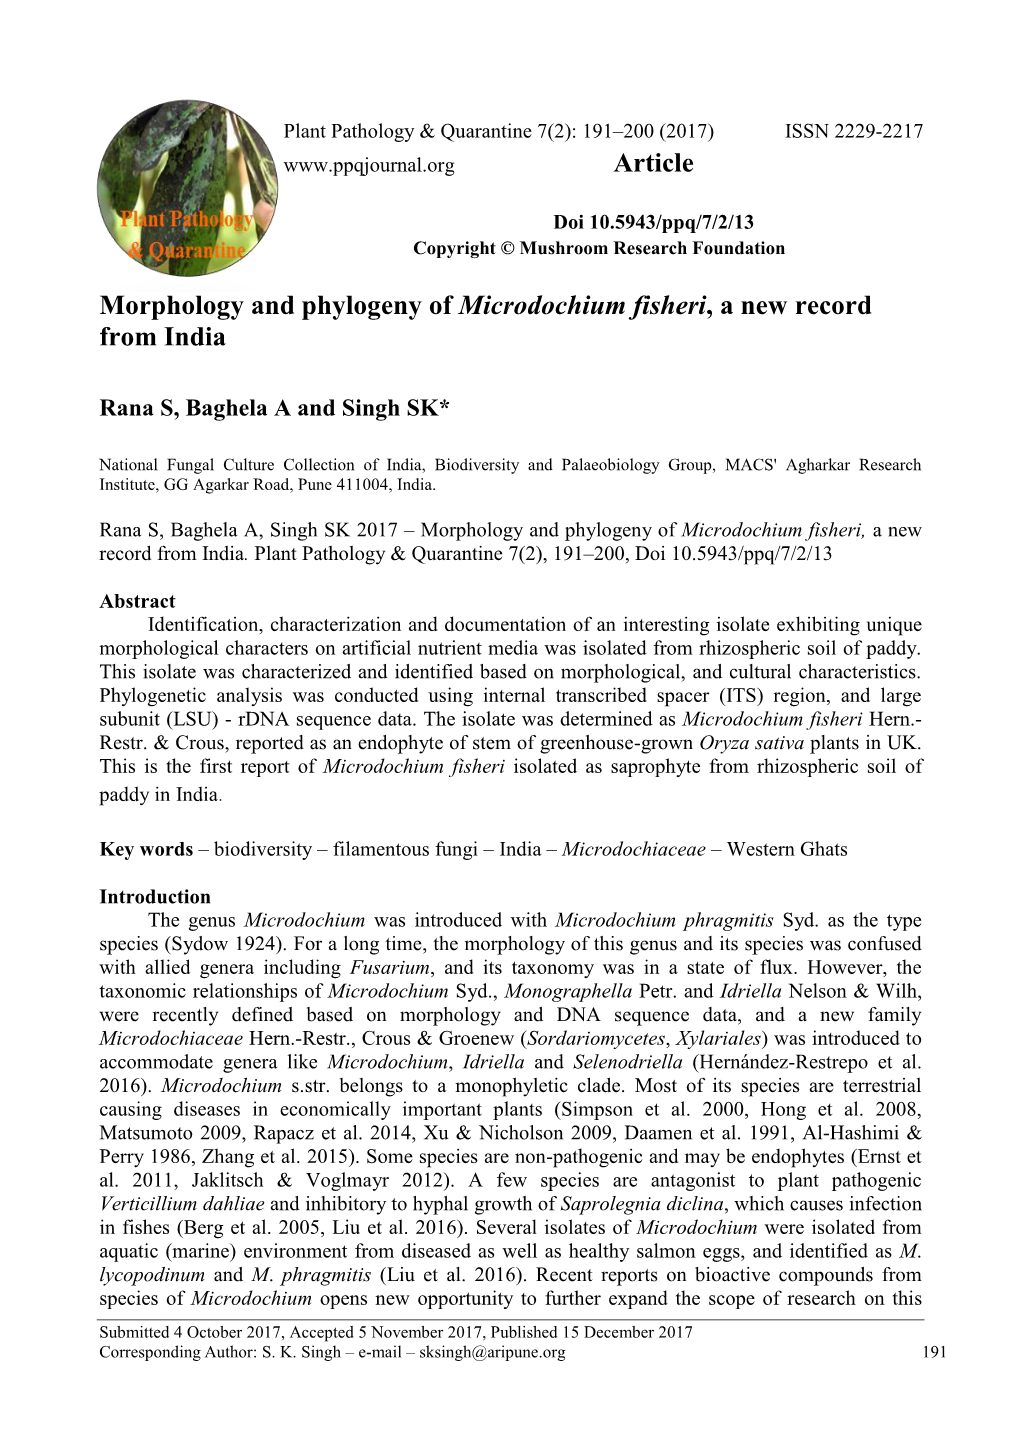 Morphology and Phylogeny of Microdochium Fisheri, a New Record from India